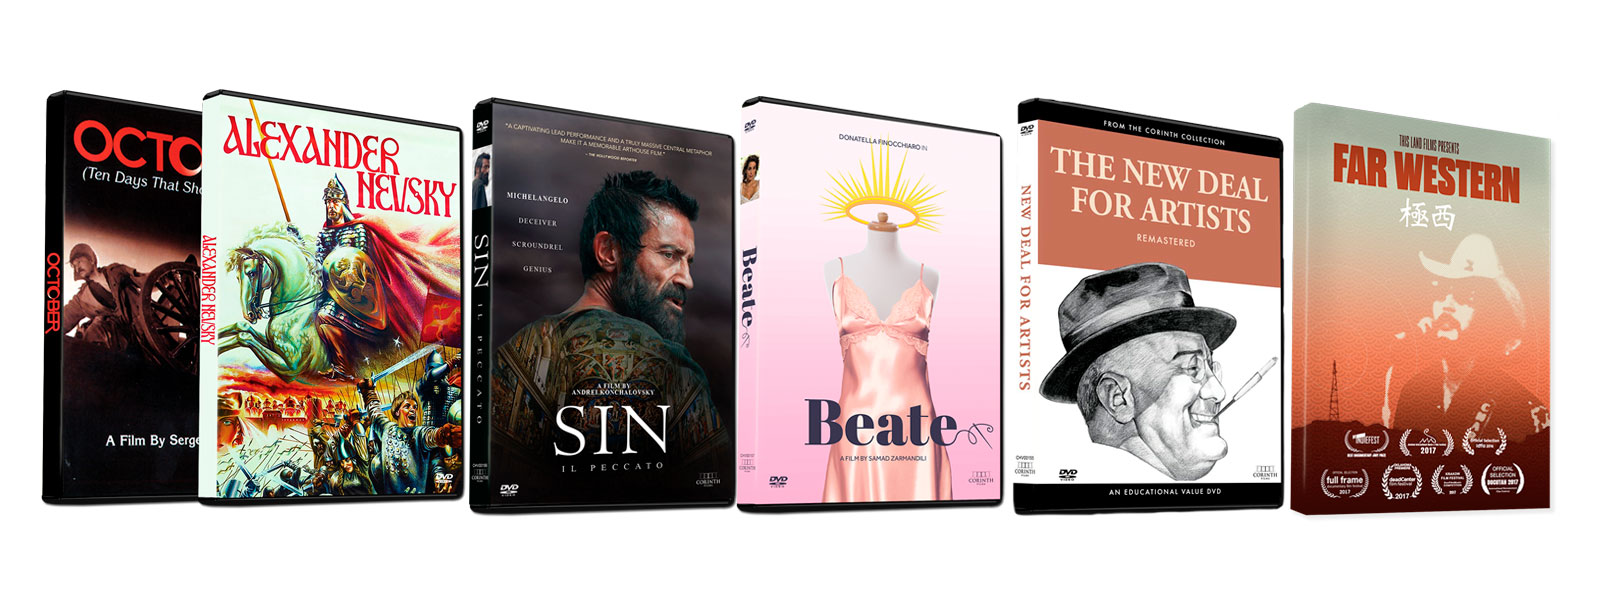 New Home Video and On-Demand Releases